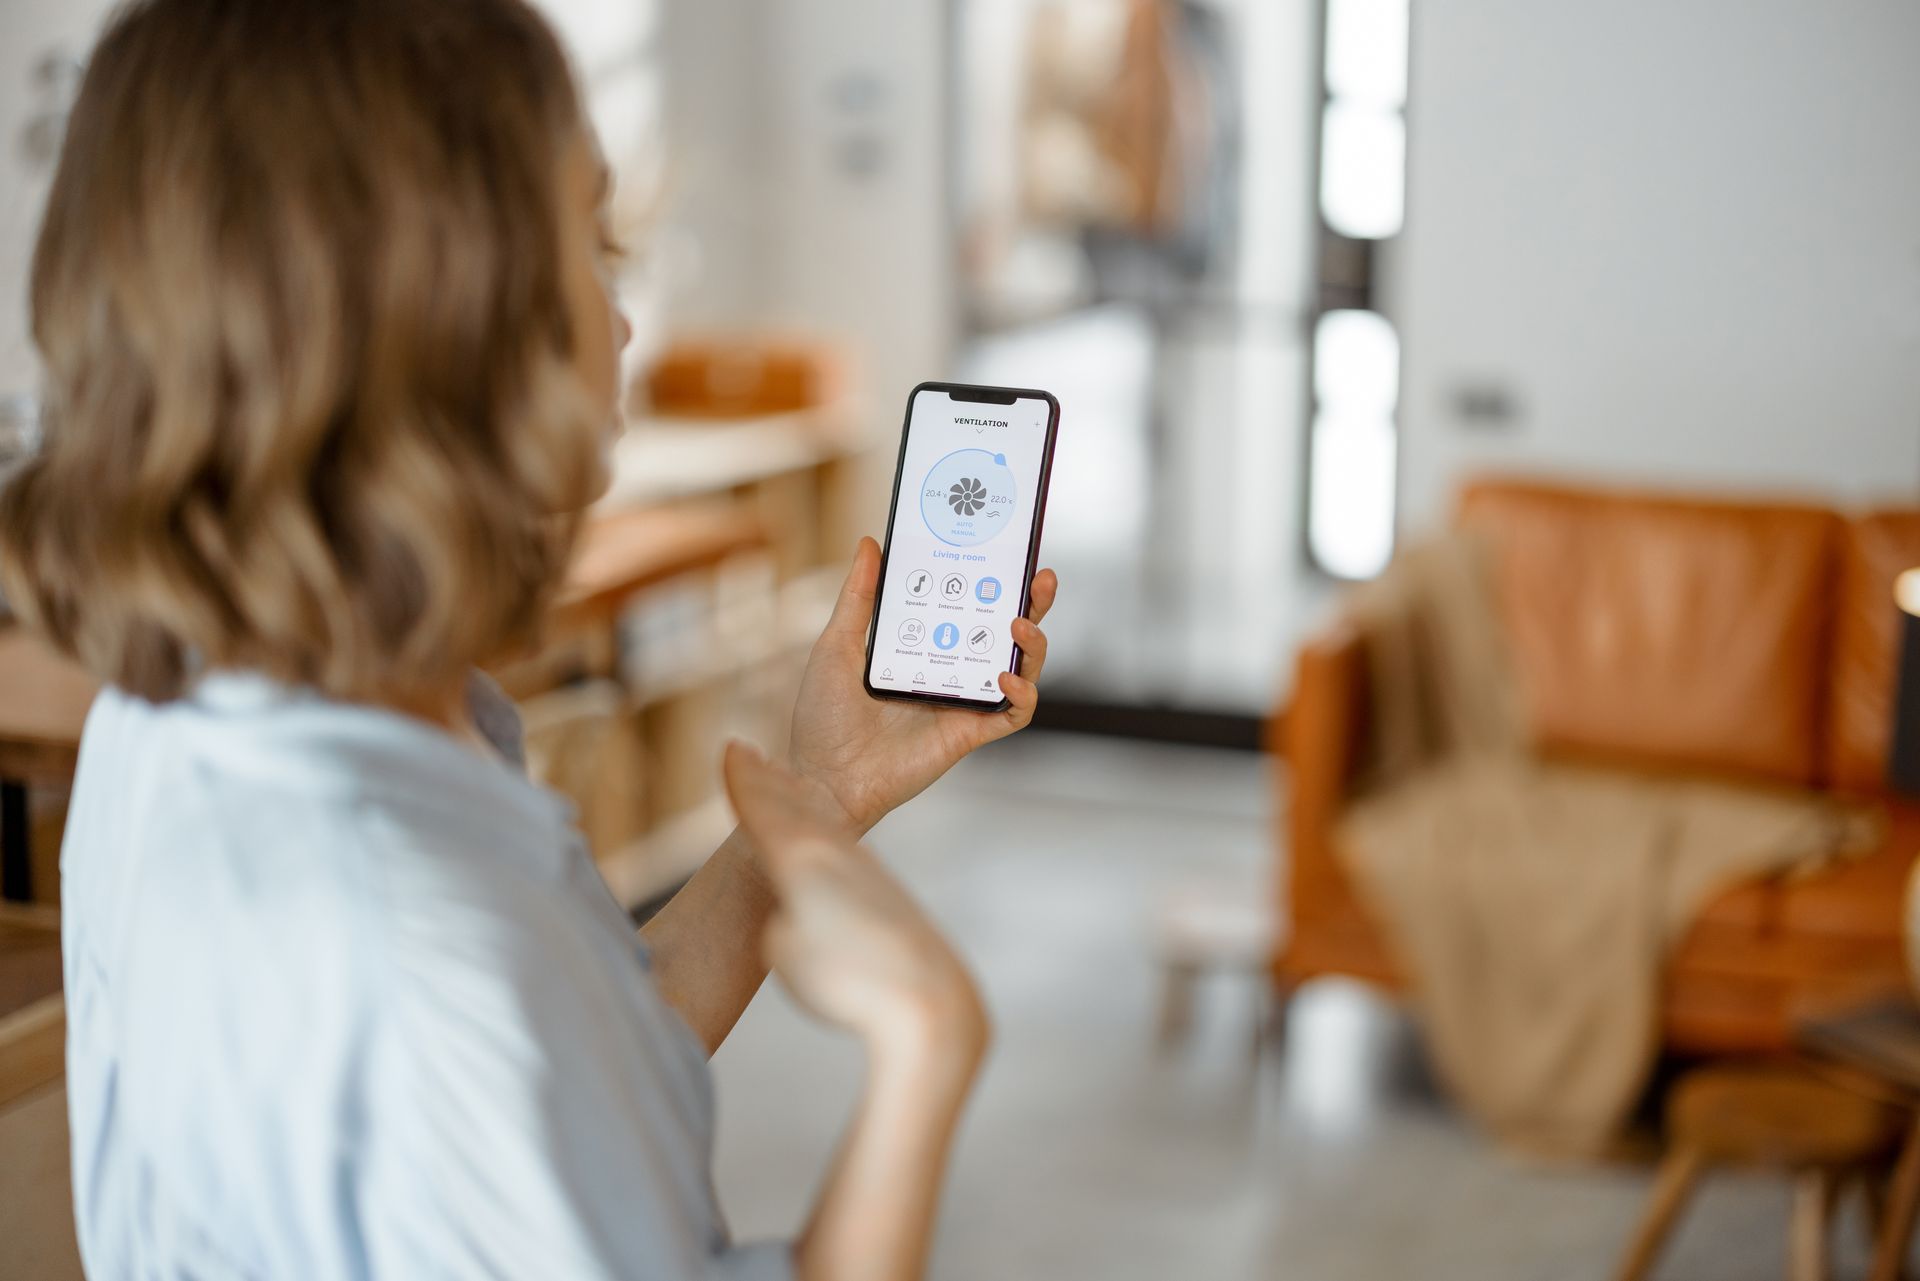 A woman is holding a smart phone in her hand in a living room.